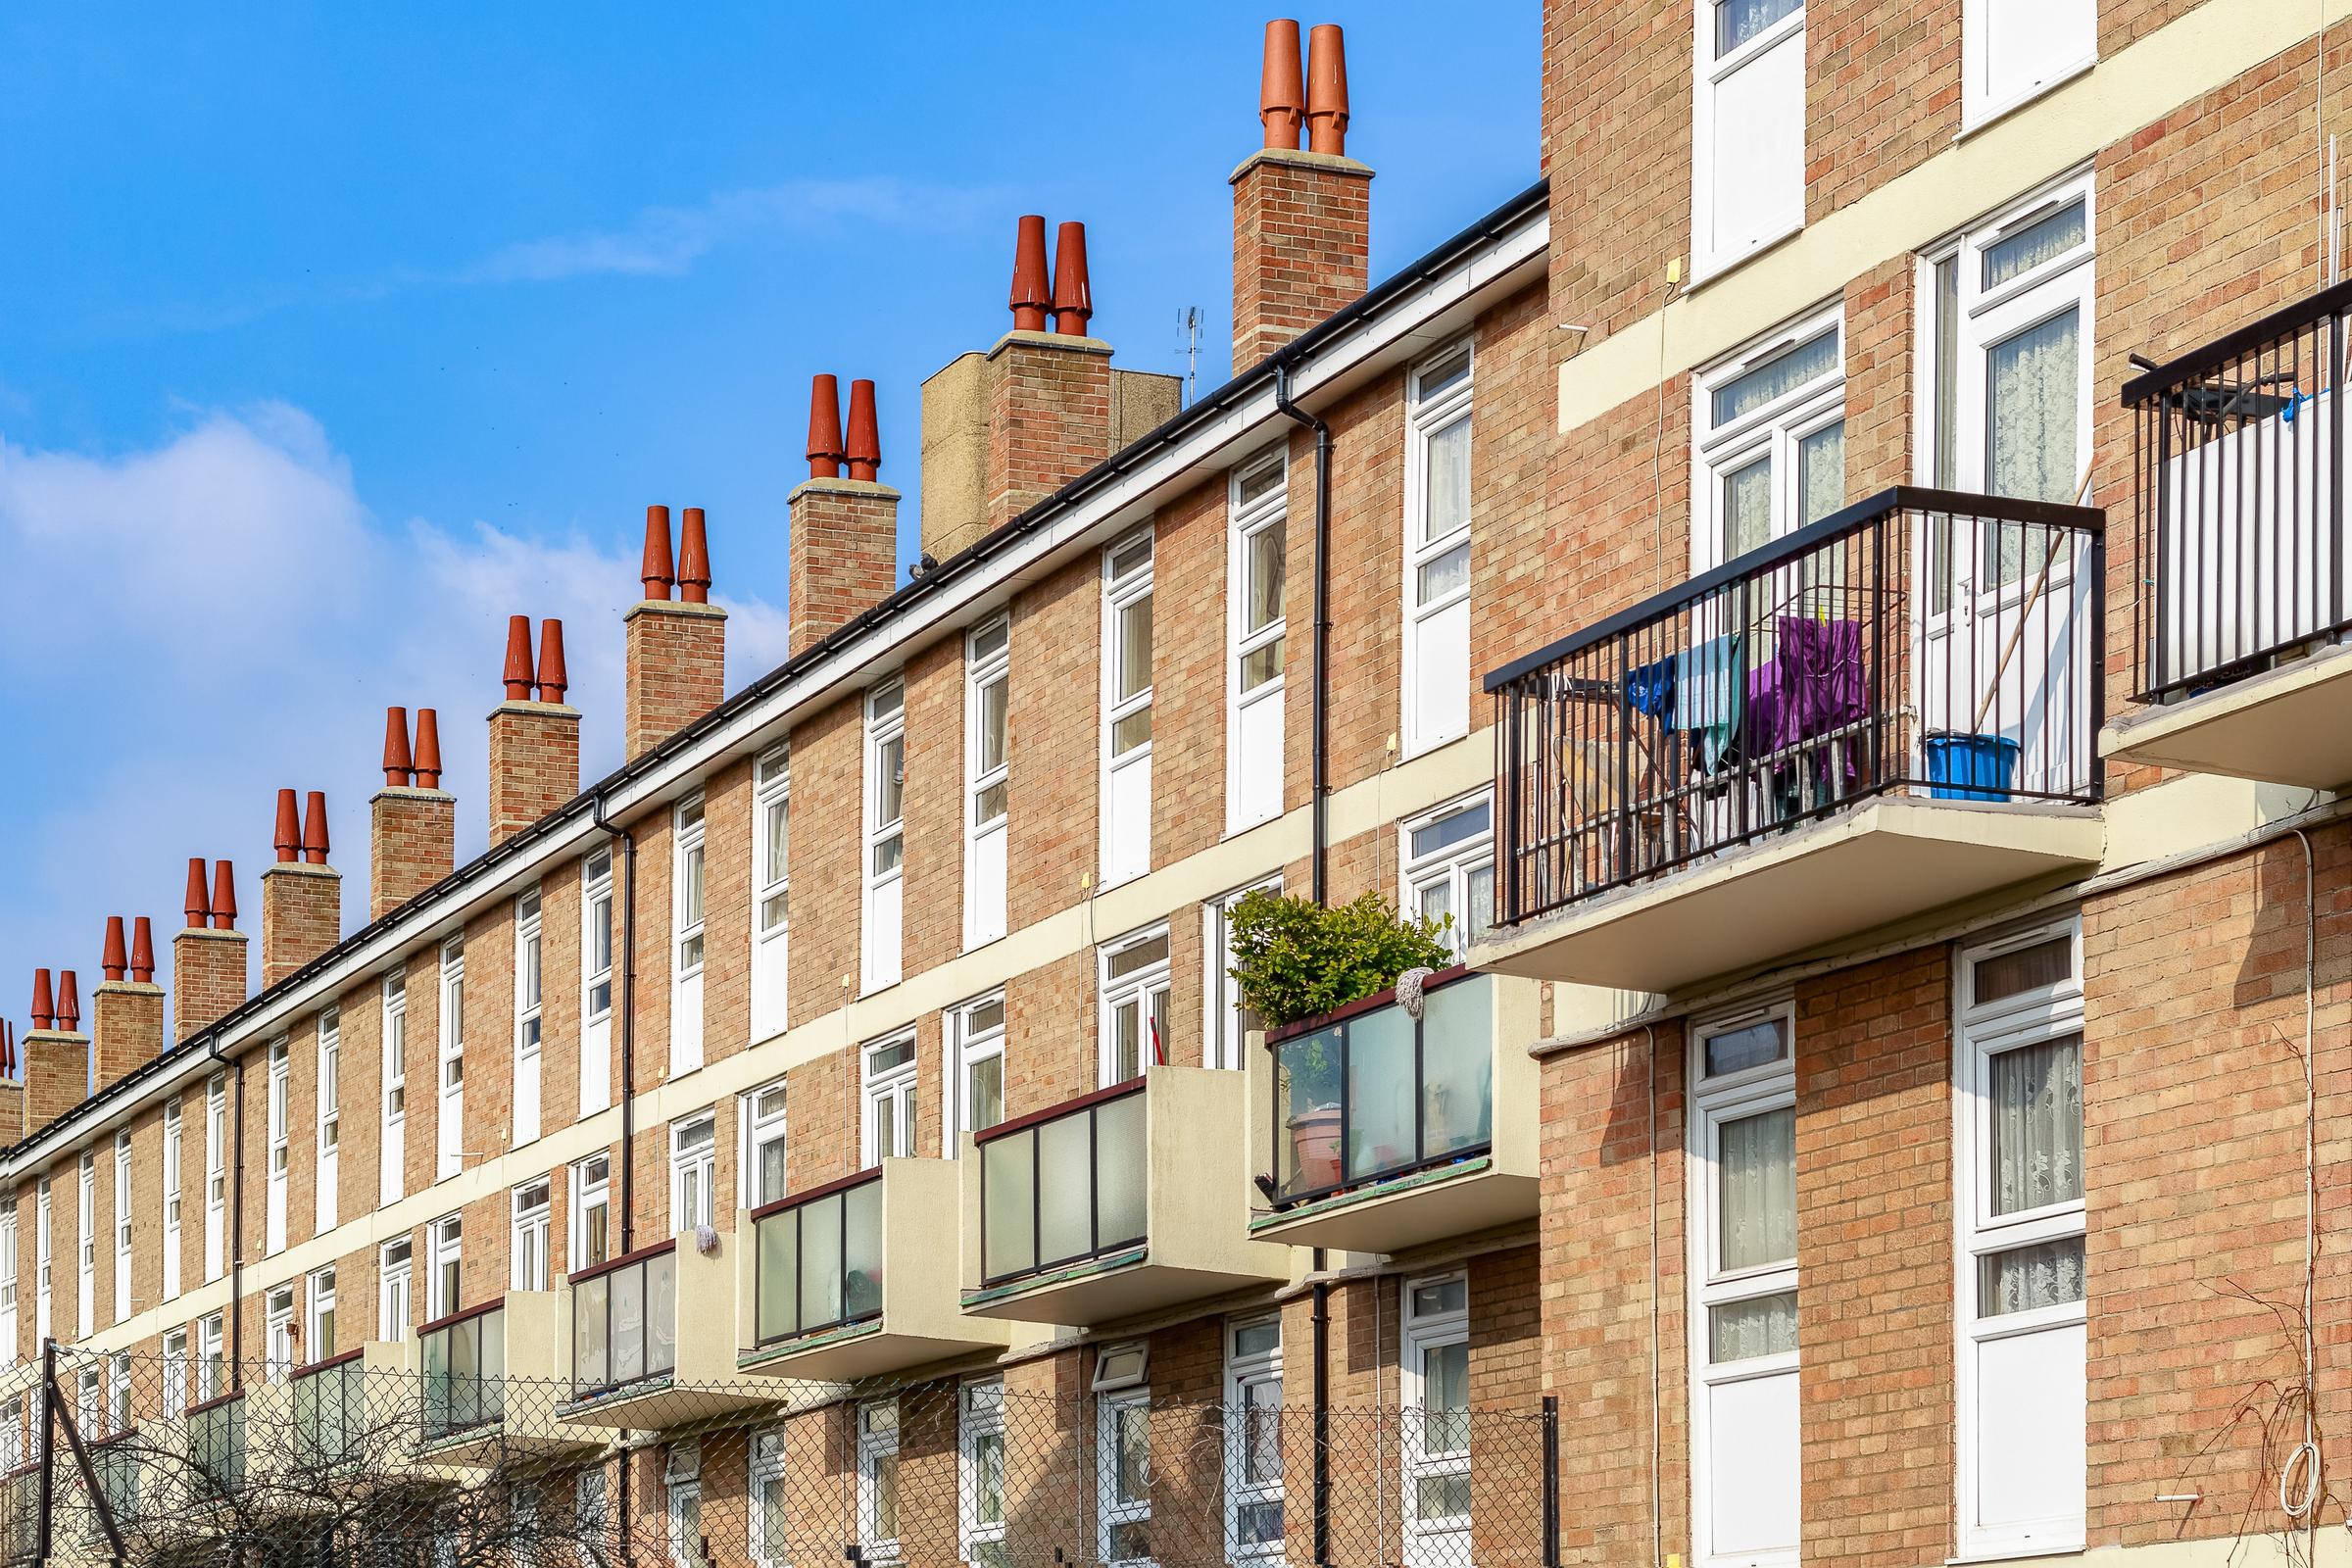 Row of typical English terraced houses in London